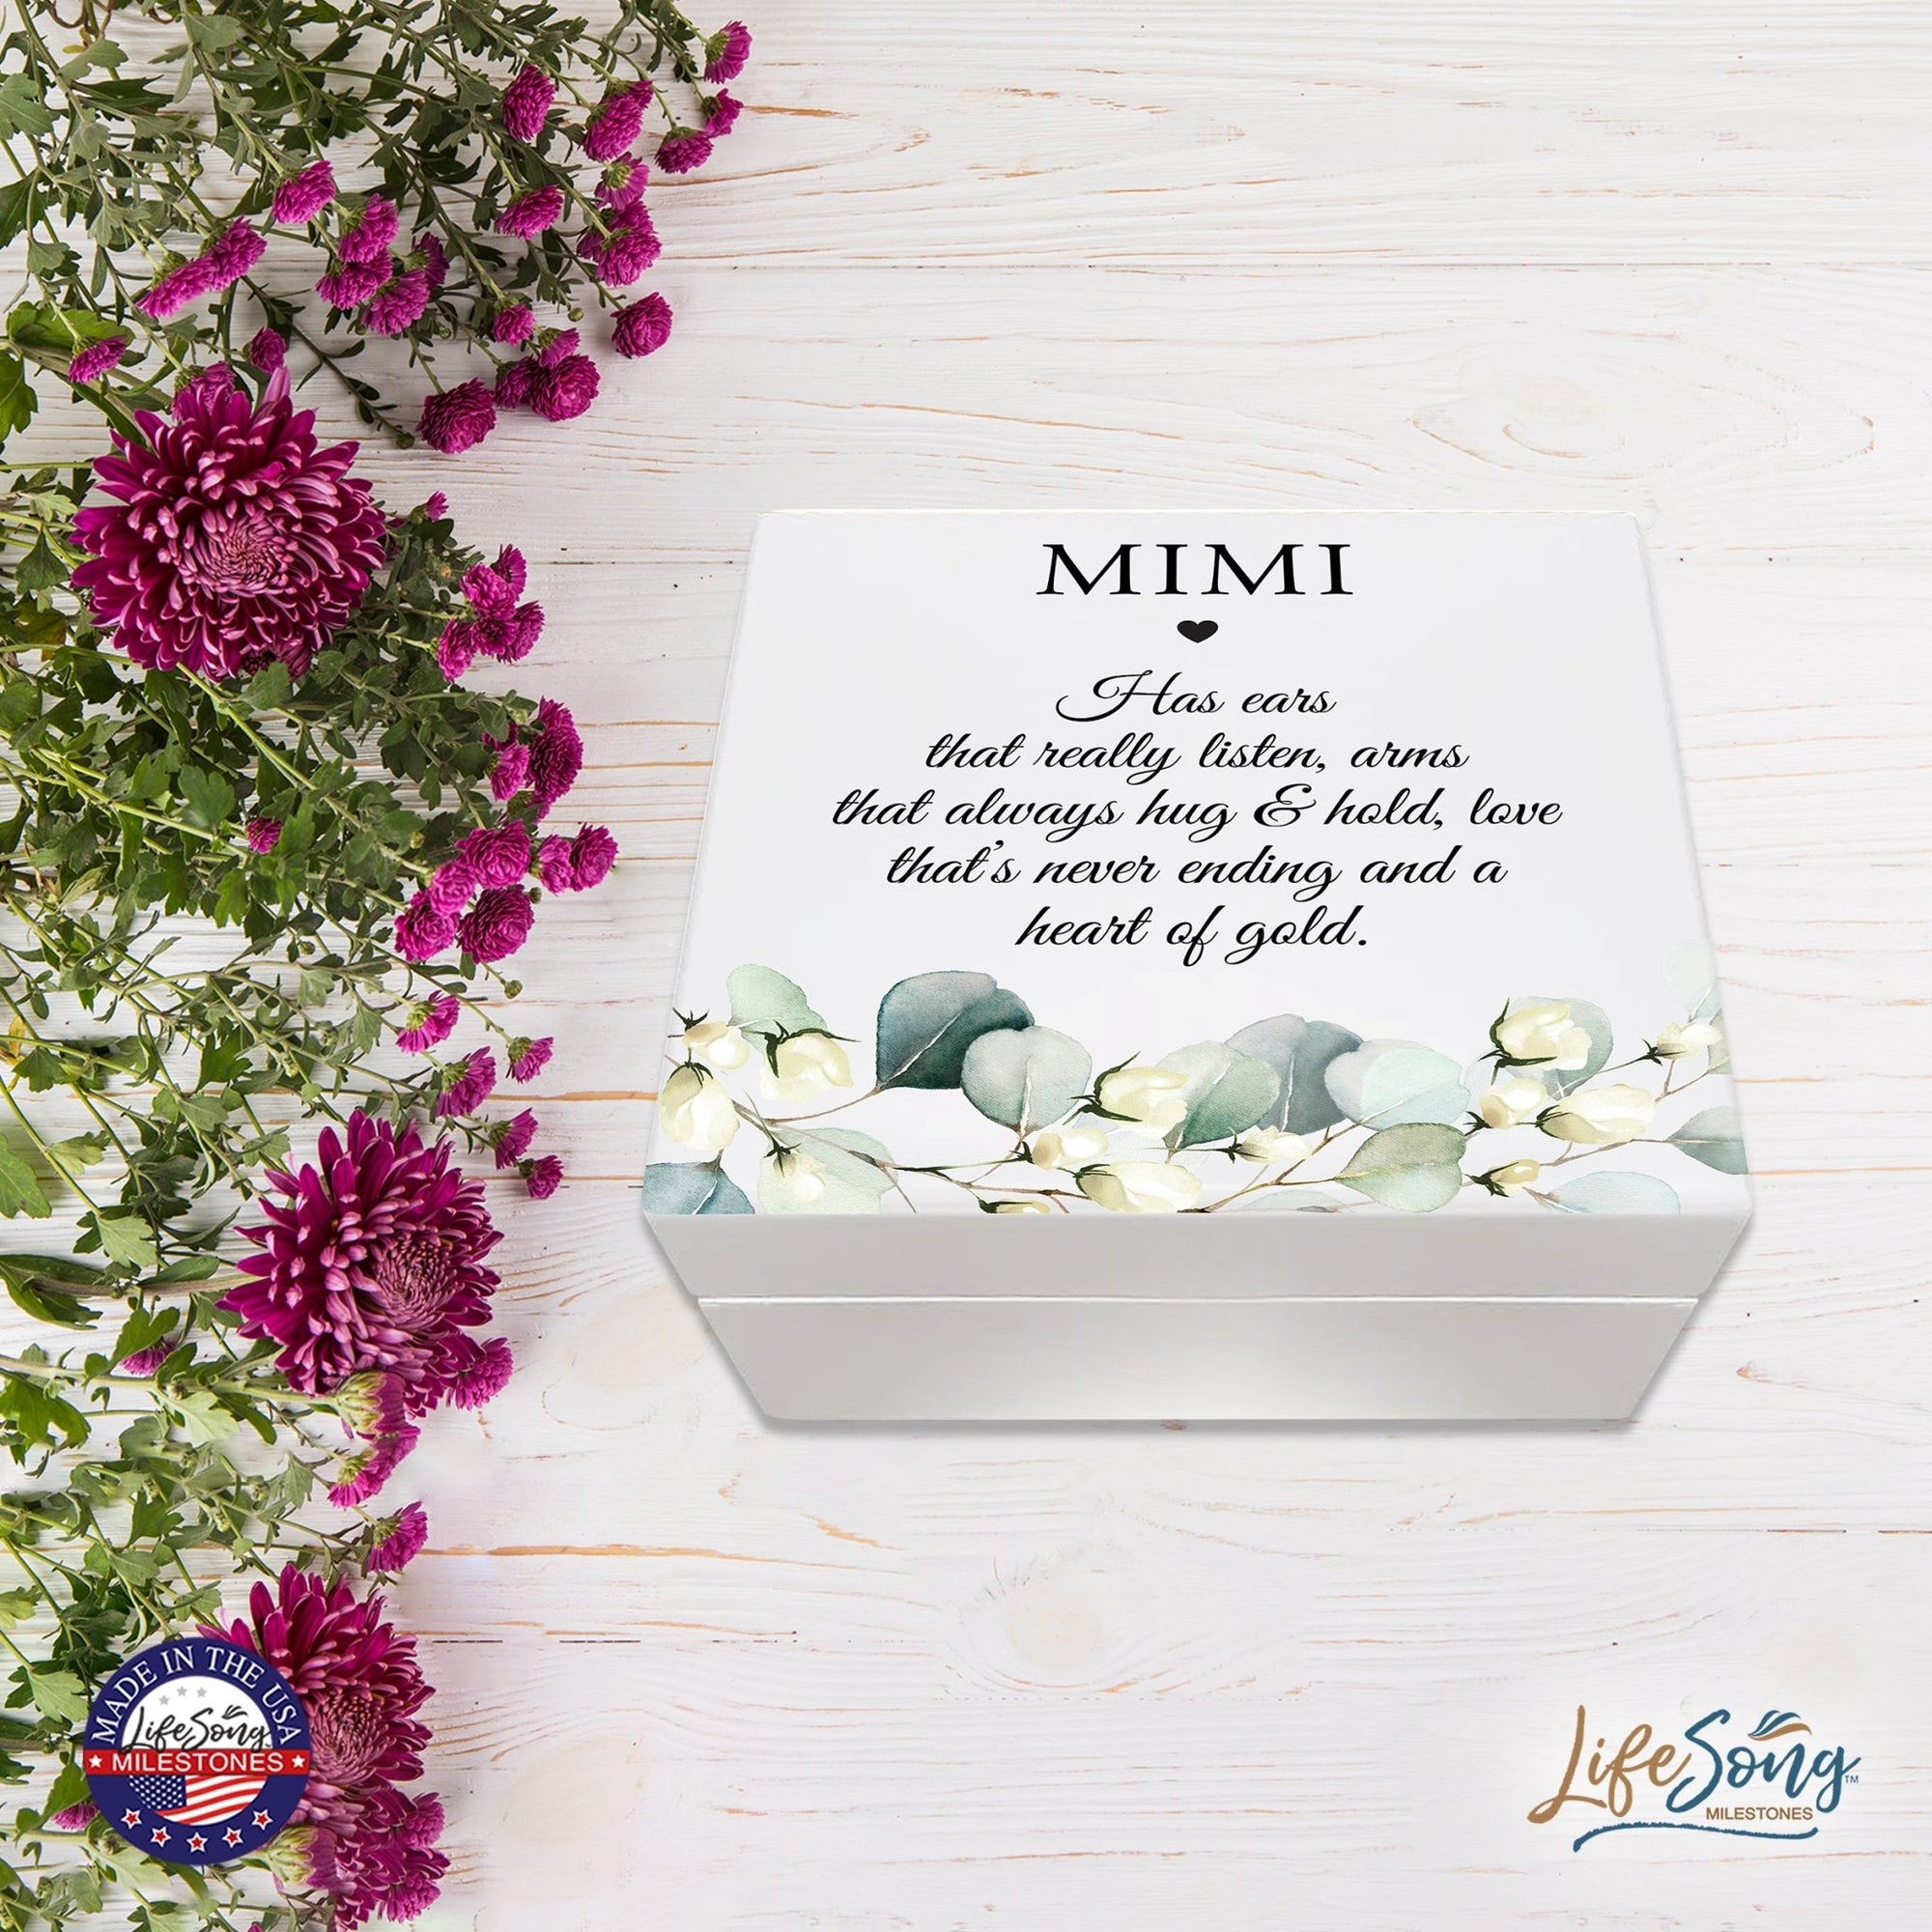 Inspirational White Jewelry Keepsake Box for Mimi - A Heart of Gold - LifeSong Milestones